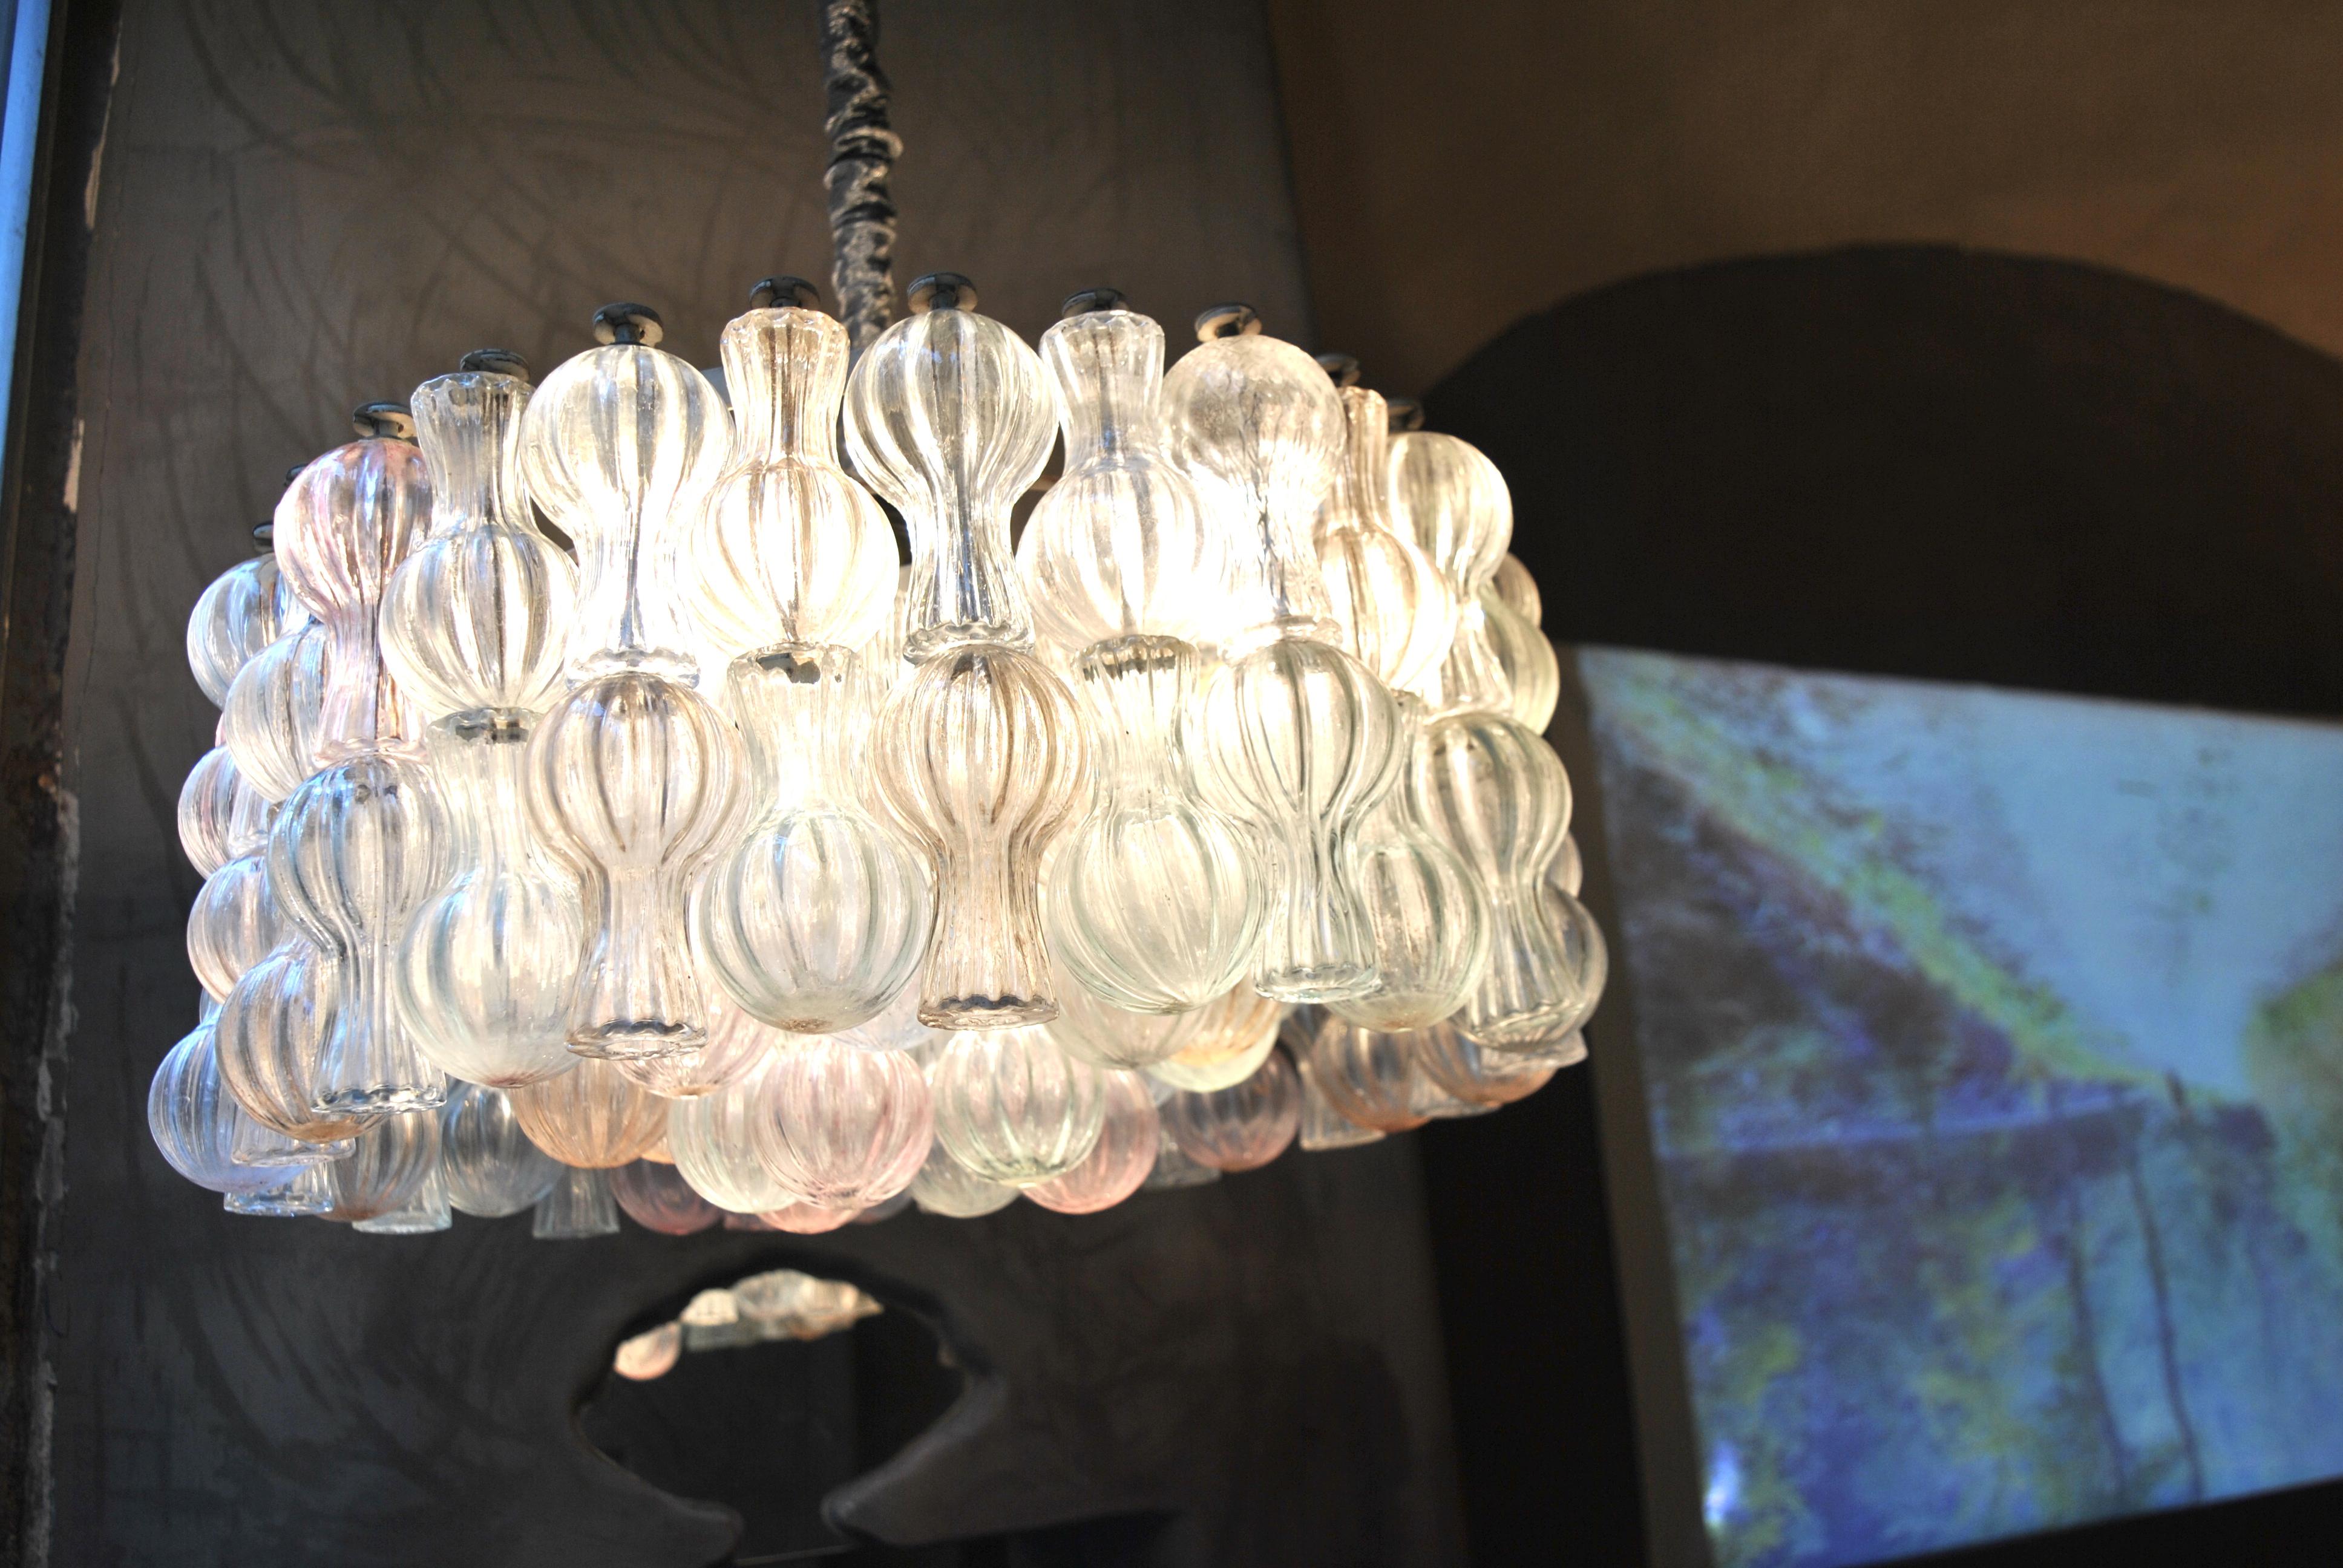 Italian Suspension Chandelier by Seguso Murano Glass from the 1950s